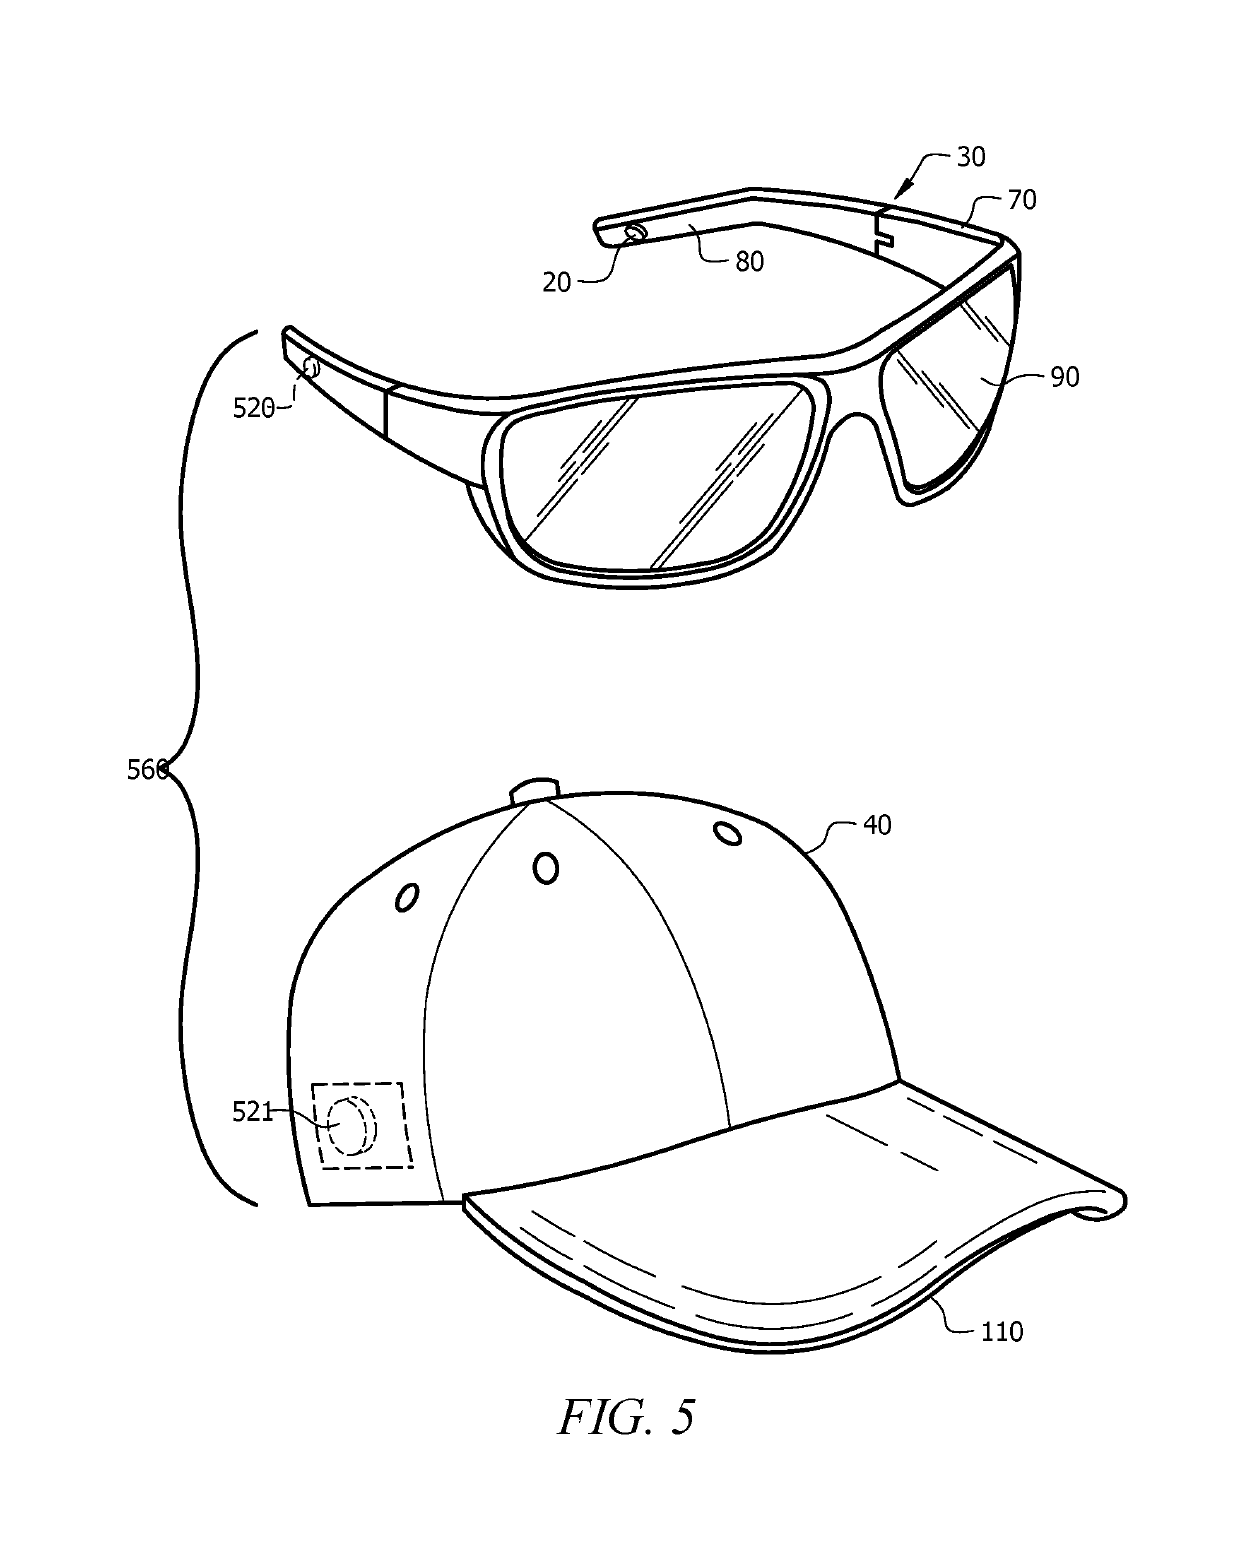 Apparatus for retractable tethering and attachment to and between headgear and eyewear and methods of making and using the same